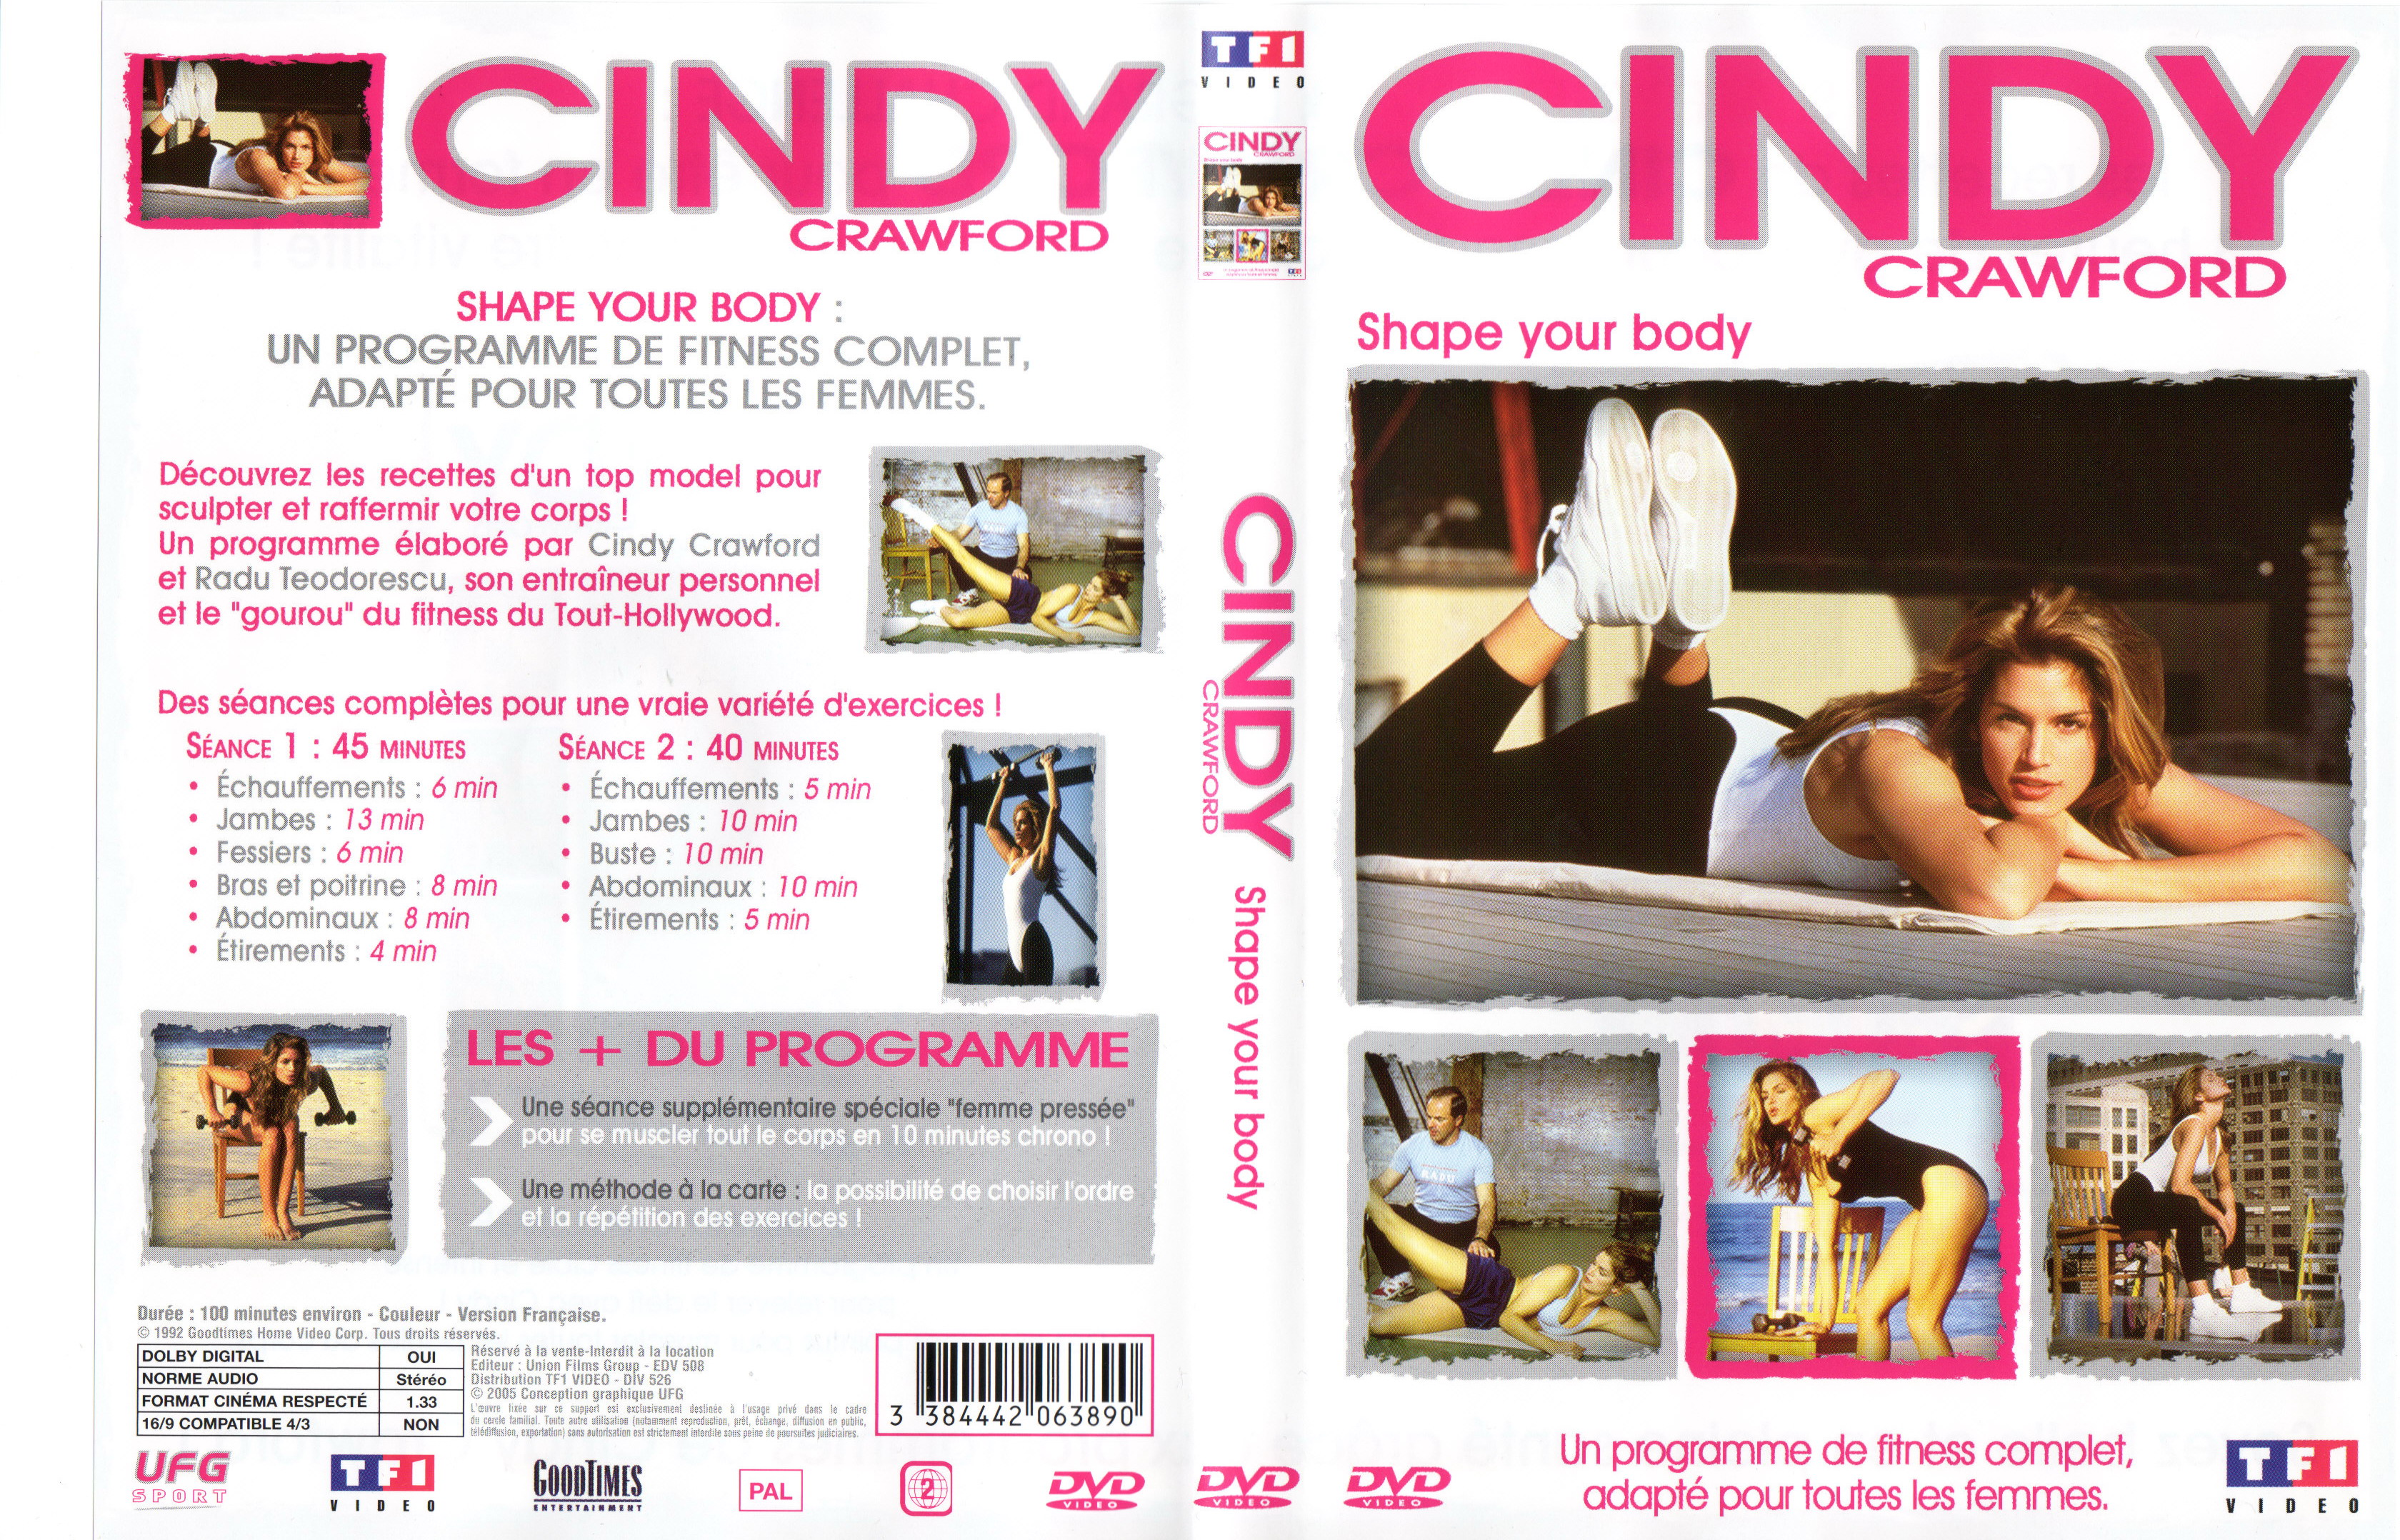 Jaquette DVD Cindy Crawford shape your body